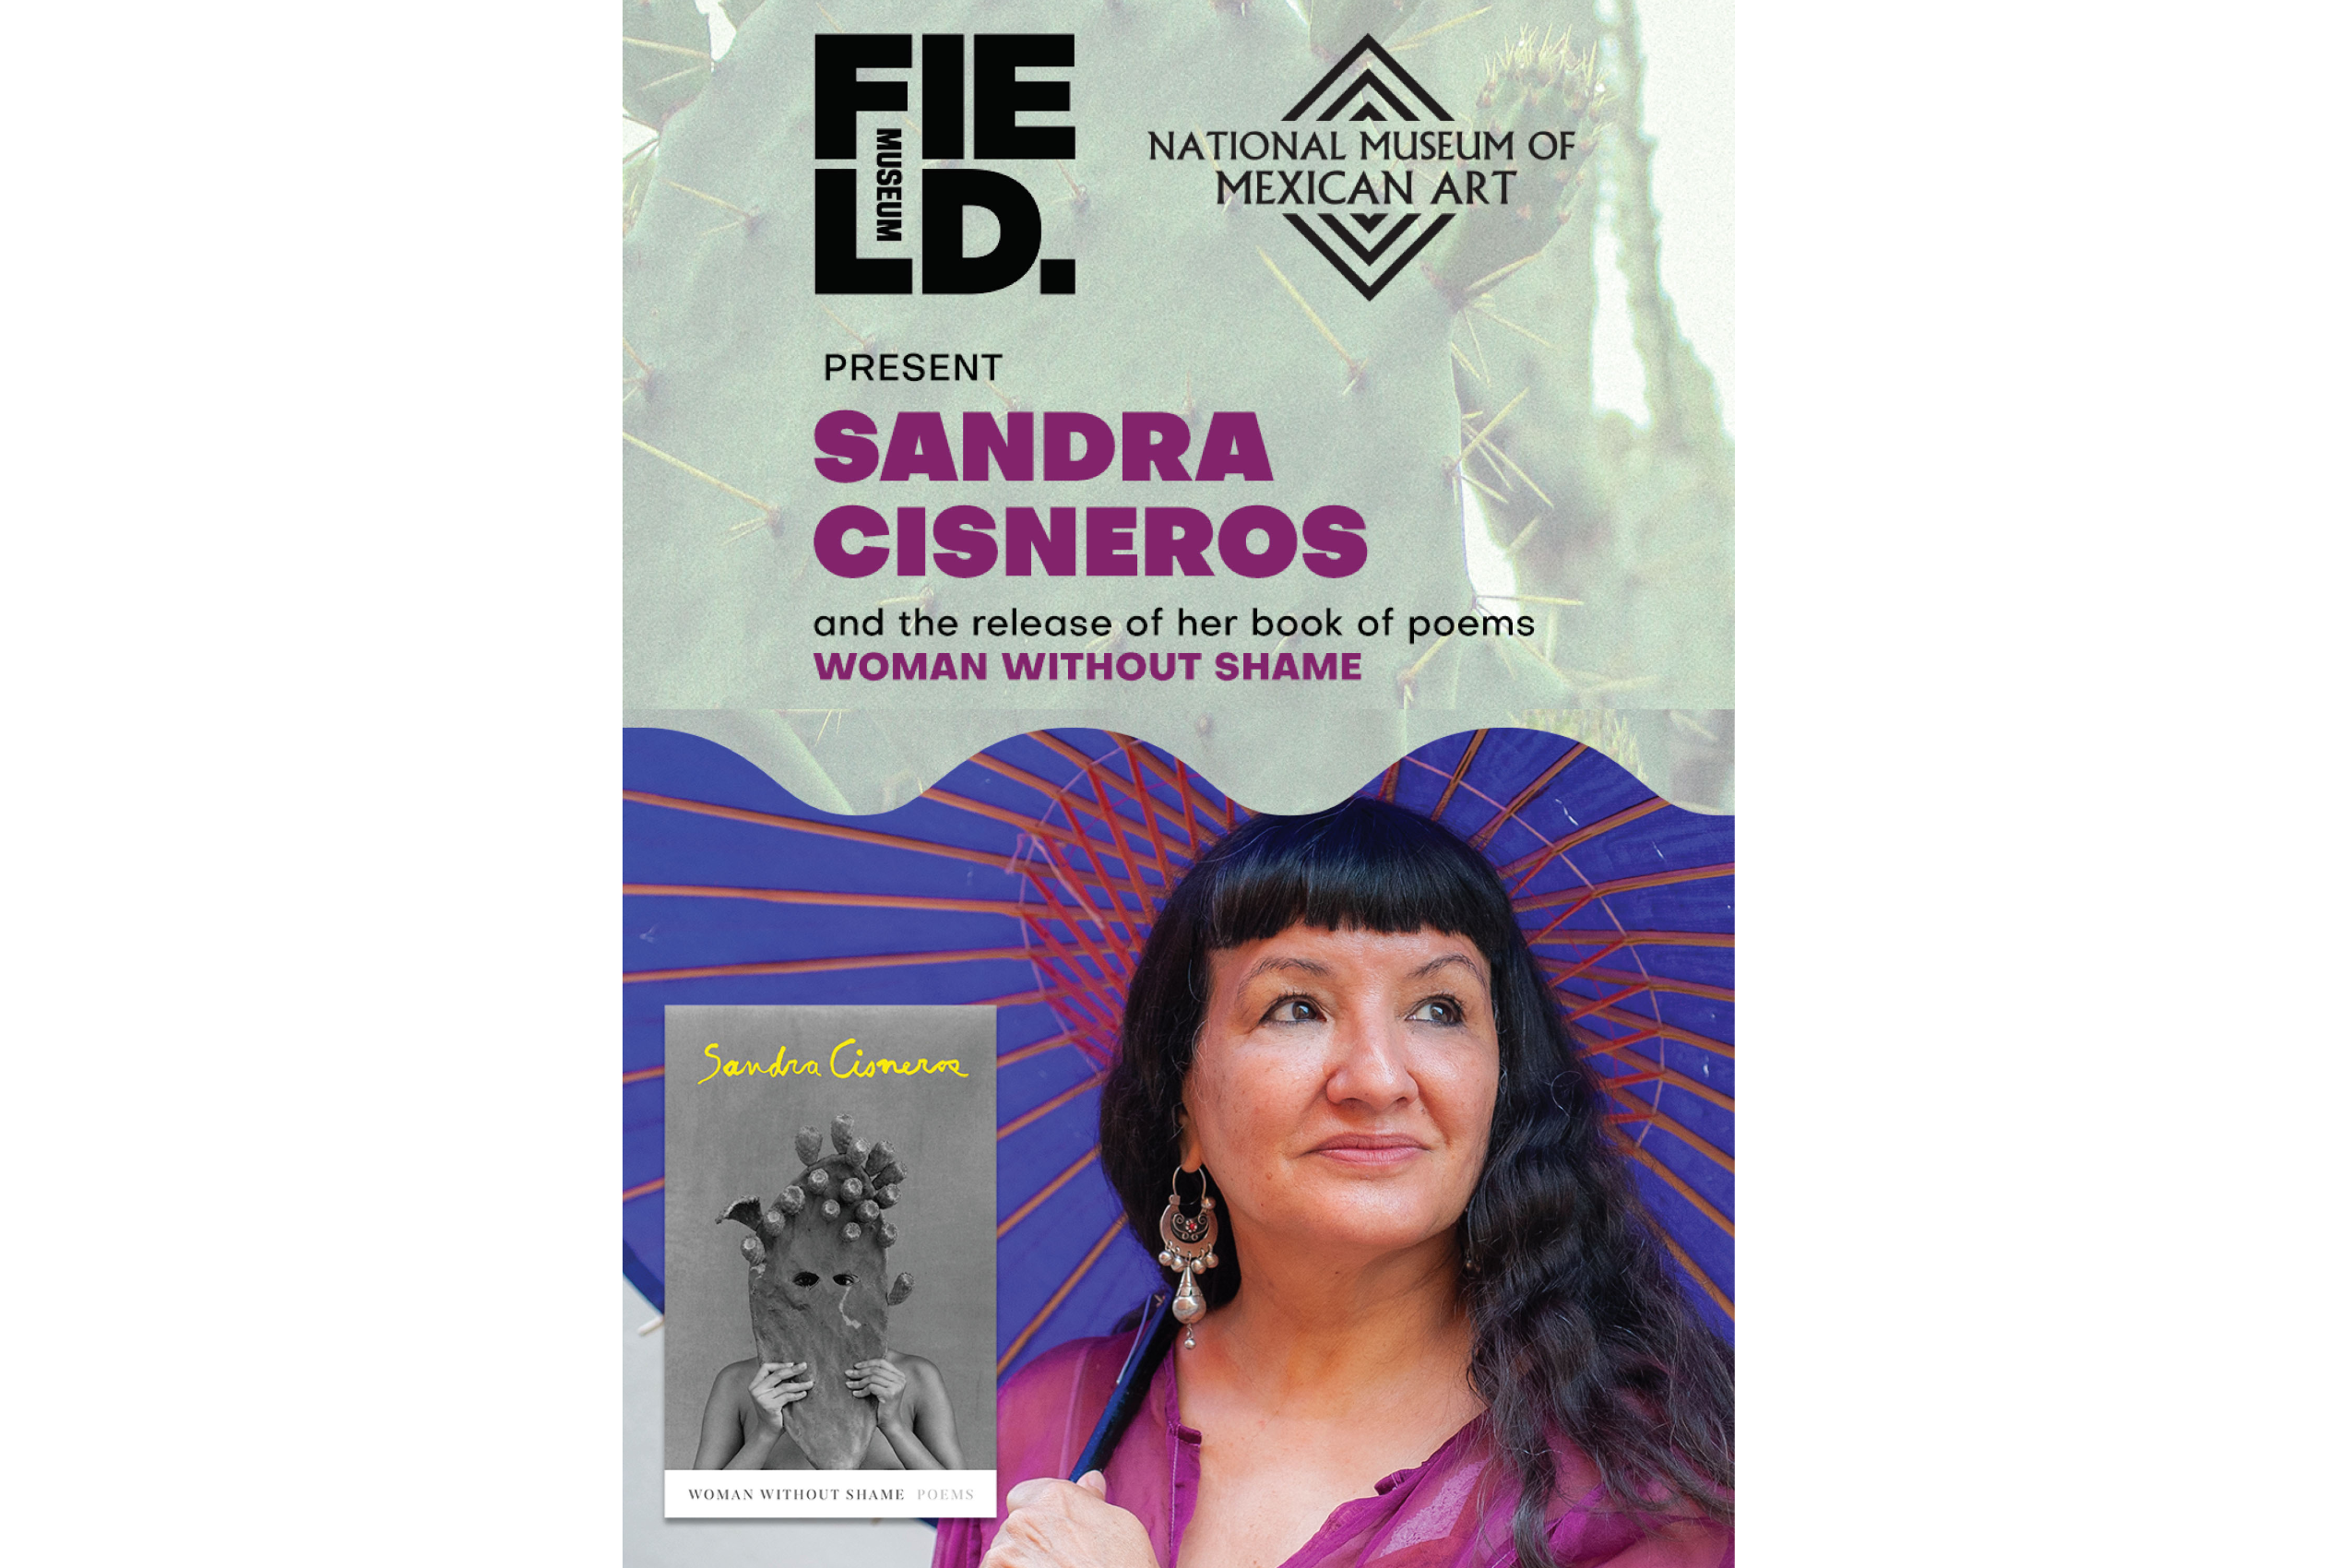 Event flyer with sponsor and museum logos on the top and a photo of the author on the bottom right. An image of her book cover is next to her.